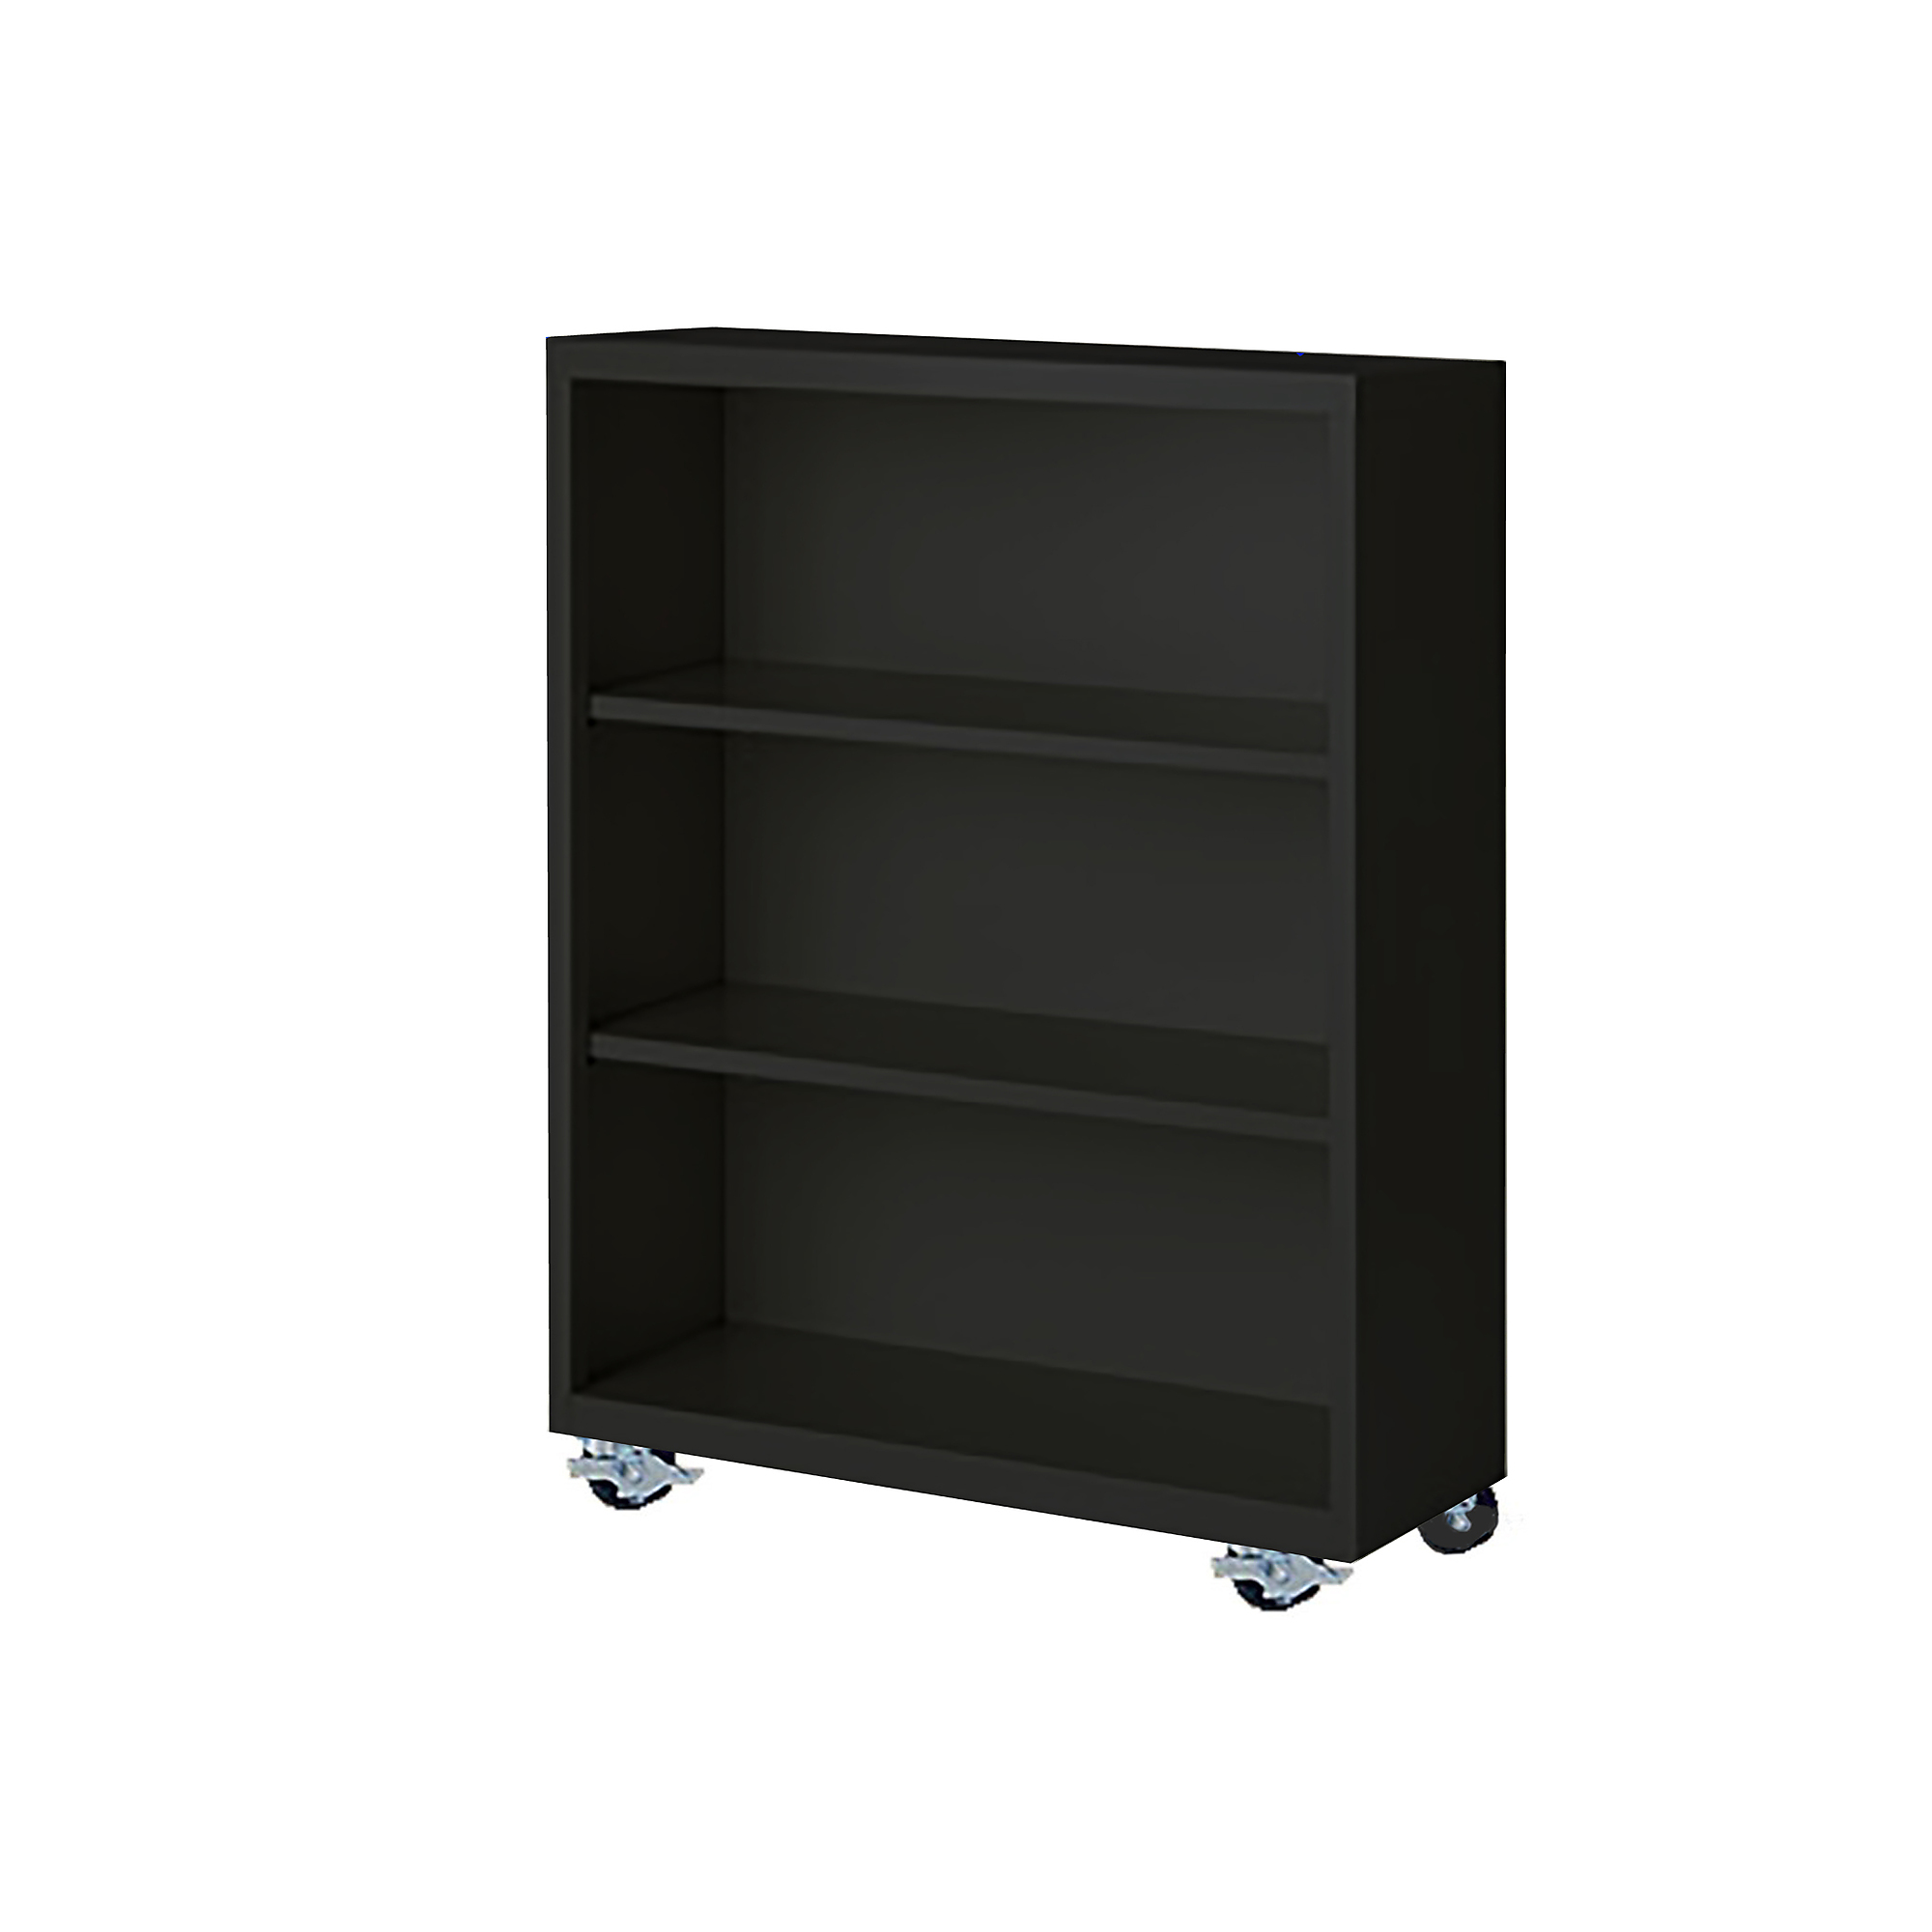 Steel Cabinets USA, 36Inchx18Inchx45Inch Black Mobile Bookcase Full Assembled, Height 45 in, Shelves (qty.) 3, Material Steel, Model MBCA-364518-B